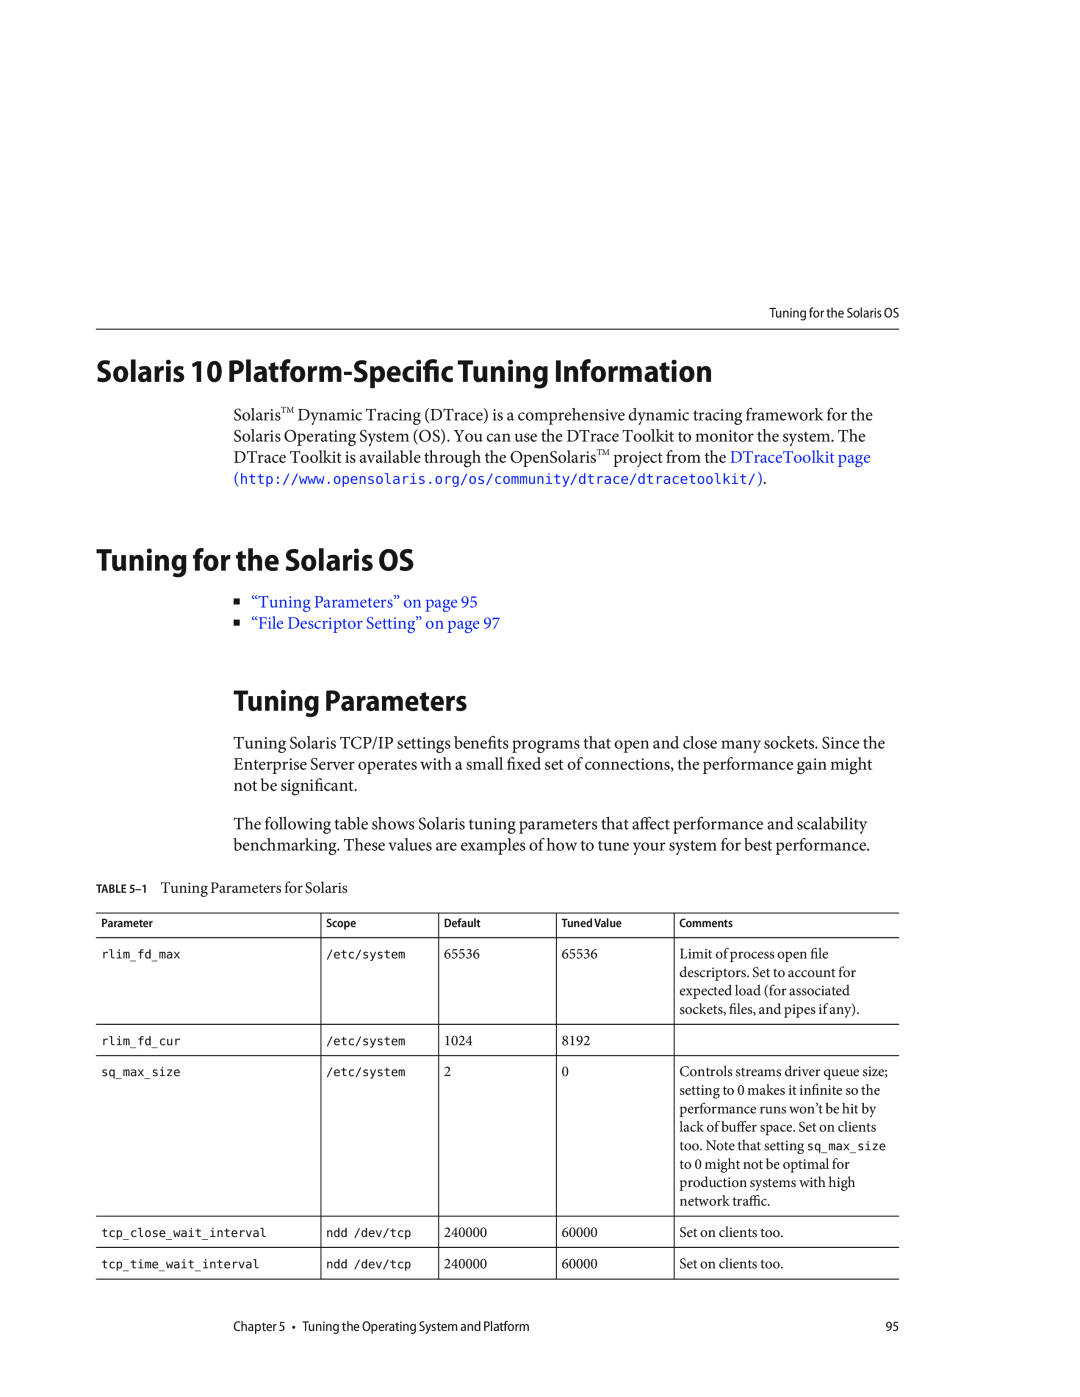 Sun Microsystems 820434310 Solaris 10 Platform-Specific Tuning Information, Tuning for the Solaris OS, Tuning Parameters 